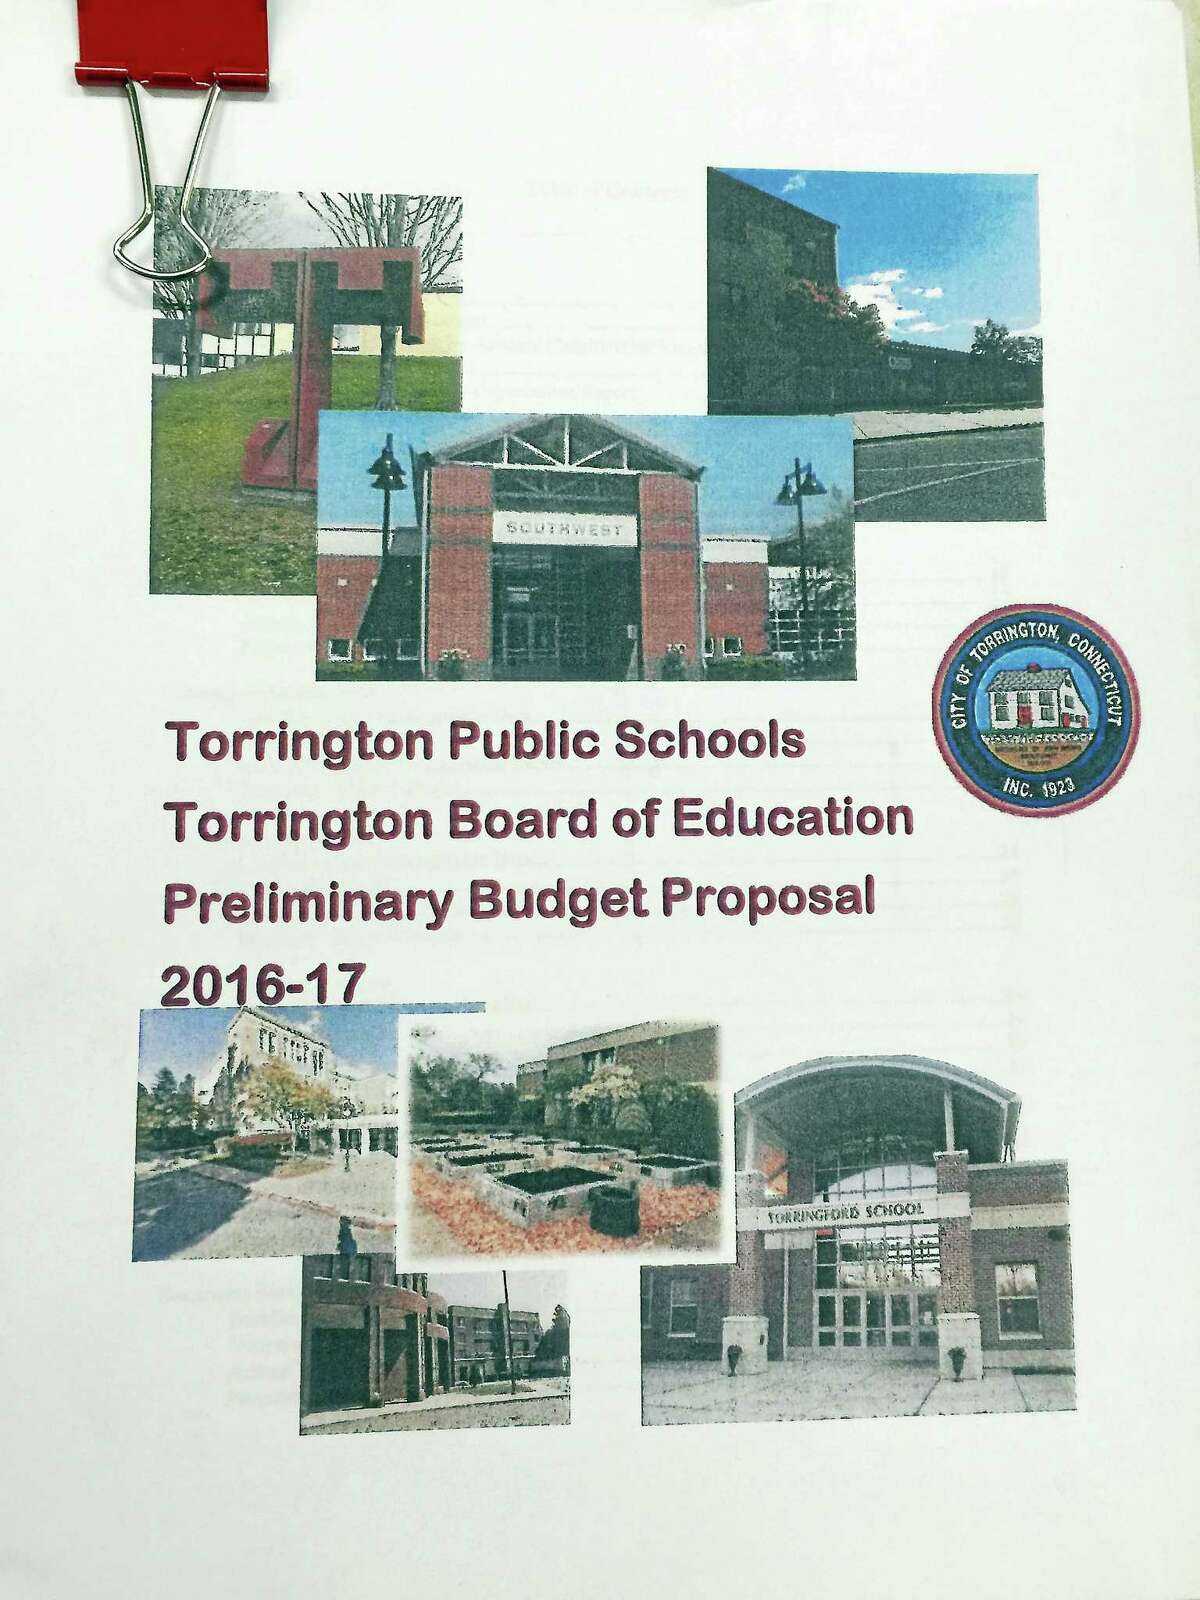 The cover of the preliminary Torrington public schools budget for the 2016-17 fiscal year.